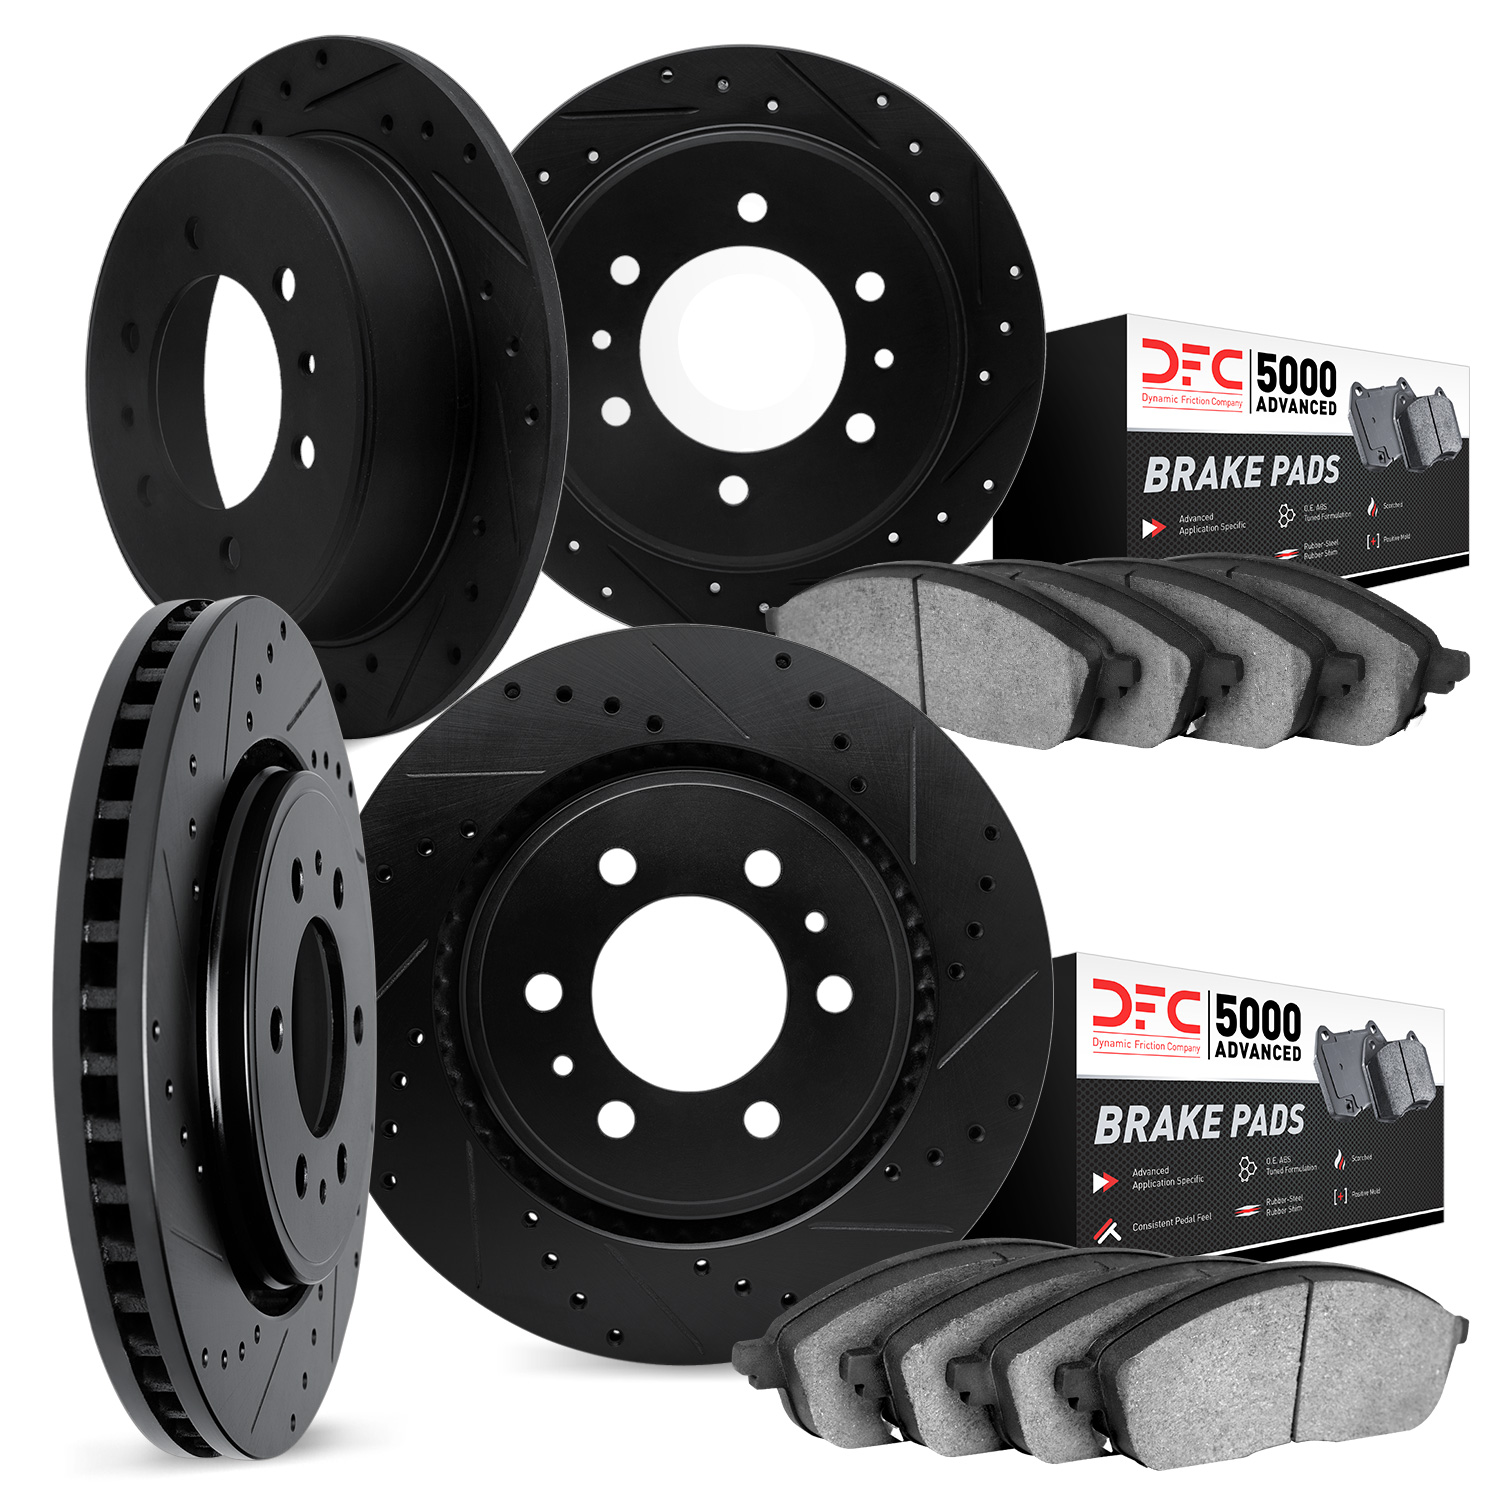 8504-52007 Drilled/Slotted Brake Rotors w/5000 Advanced Brake Pads Kit [Black], 2006-2009 GM, Position: Front and Rear